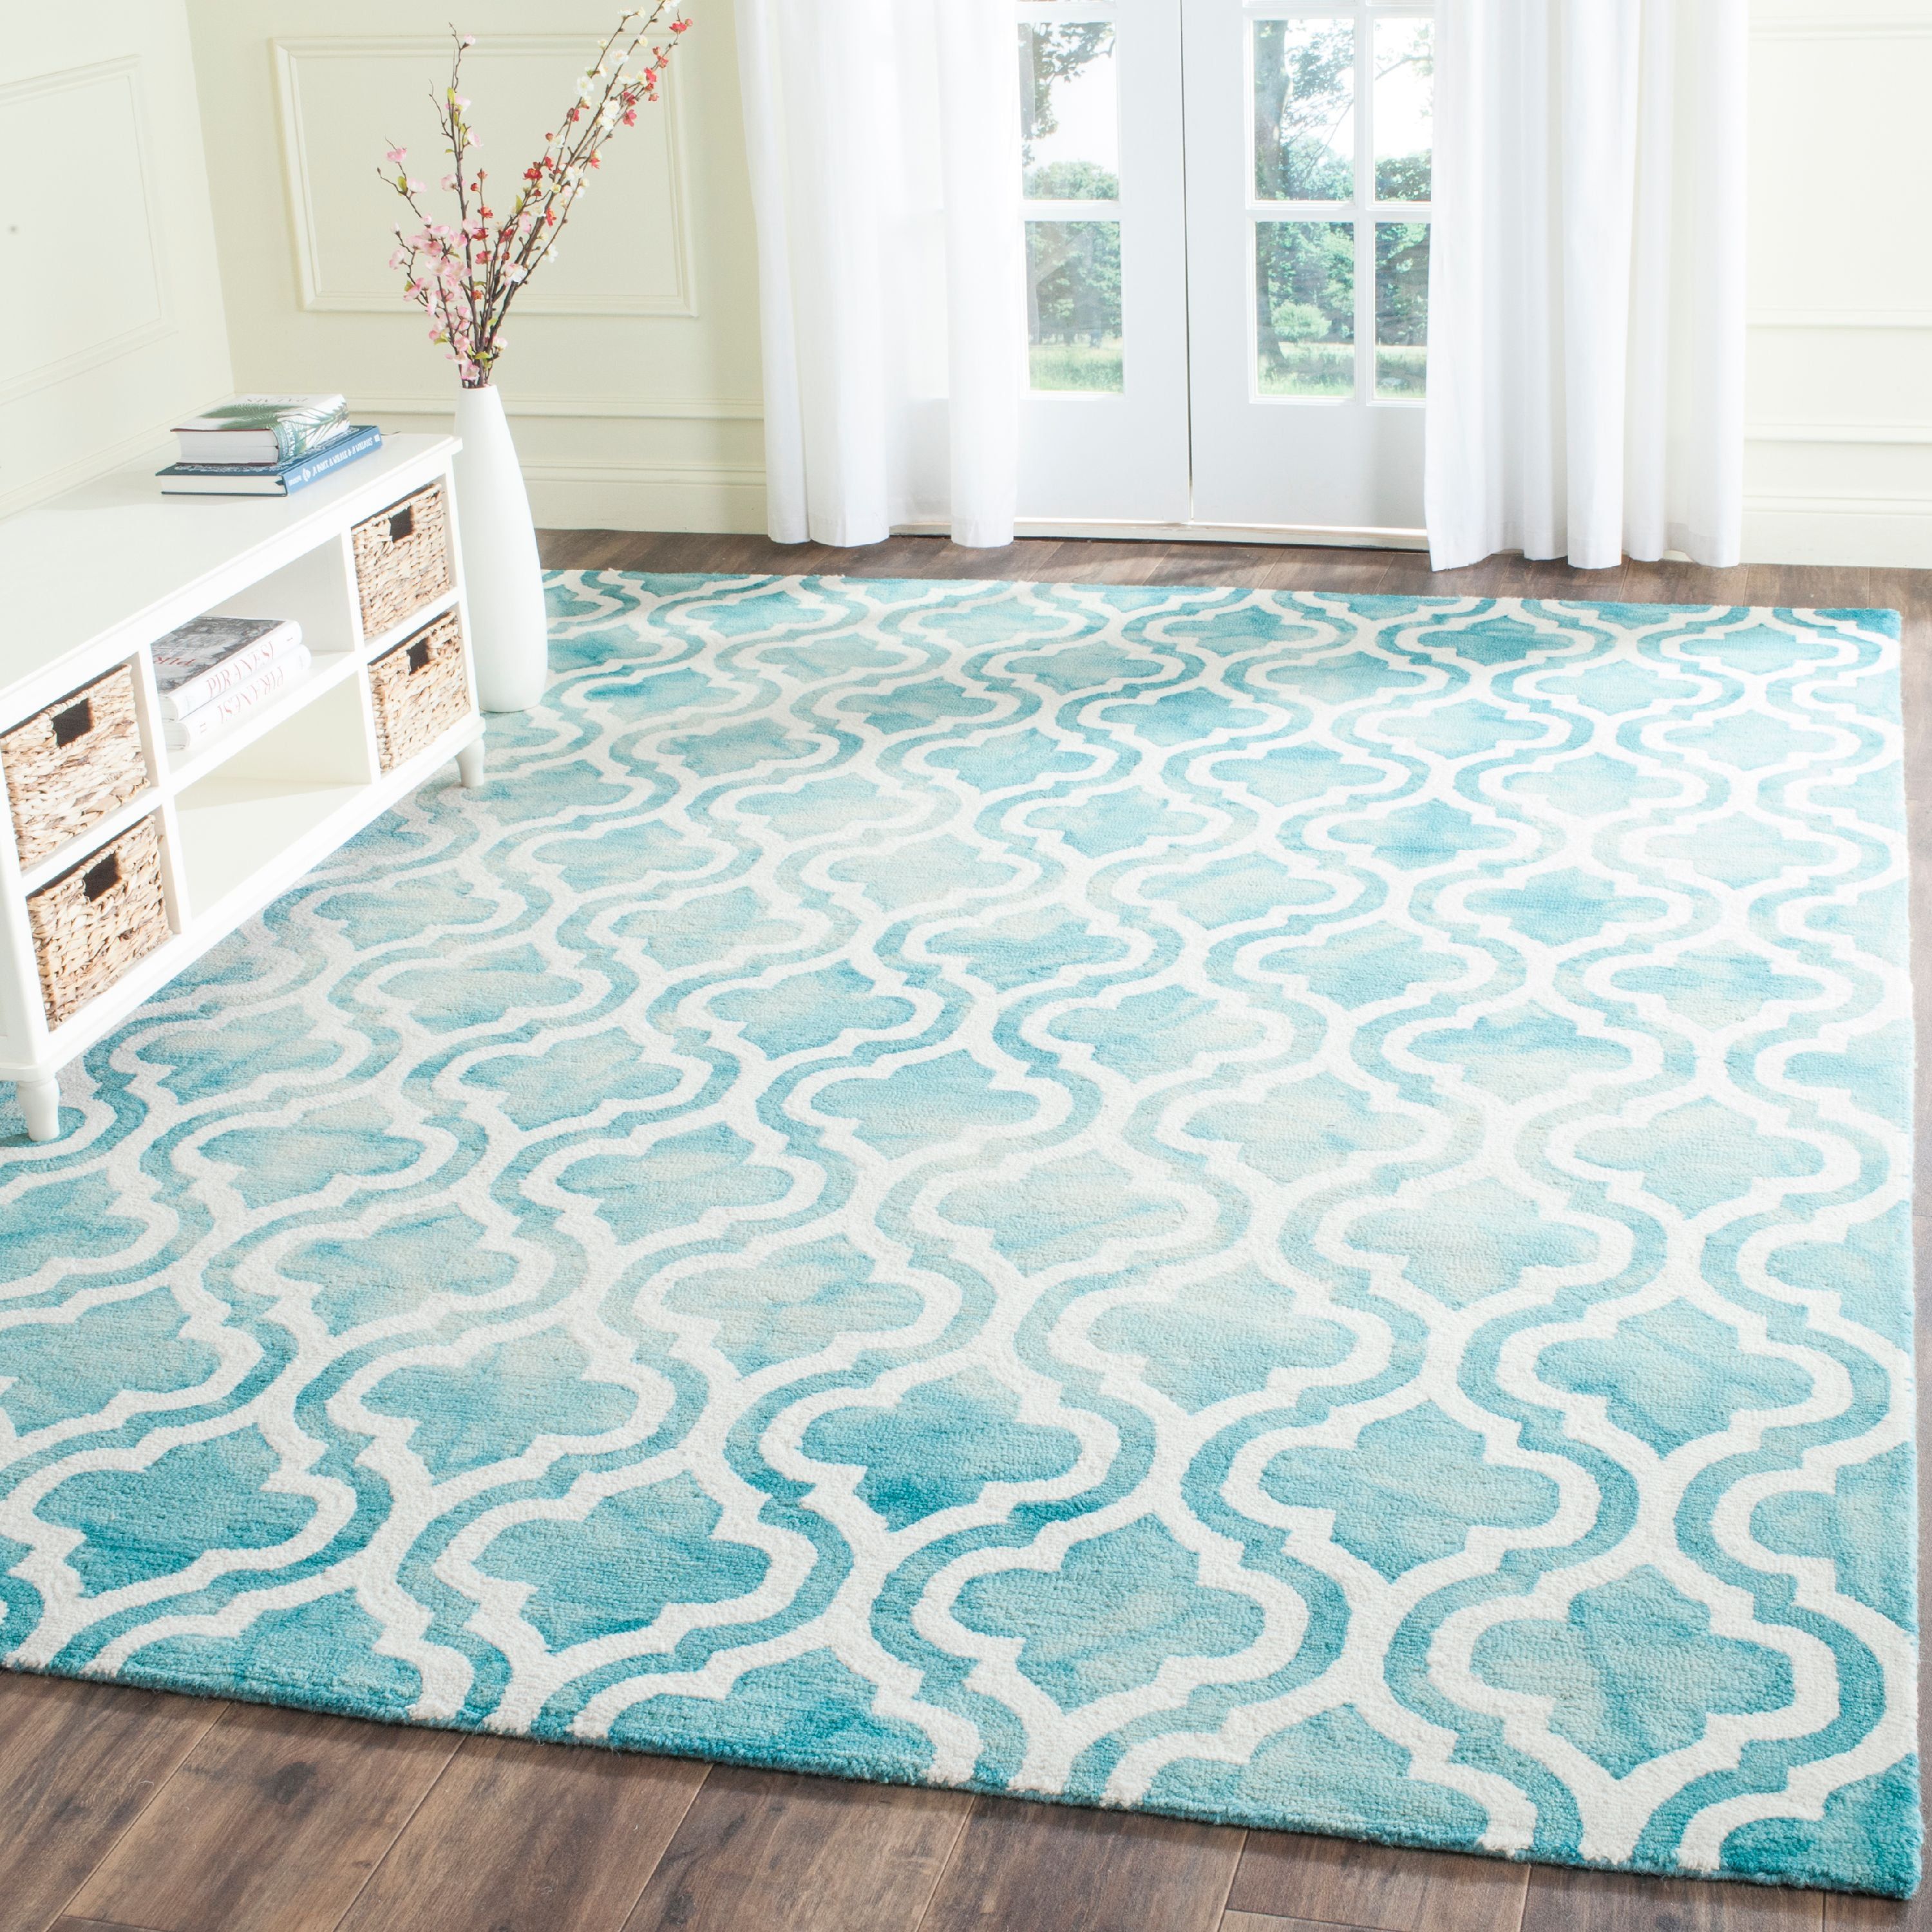 Turquoise and Ivory Hand-Tufted Wool 9' x 12' Area Rug